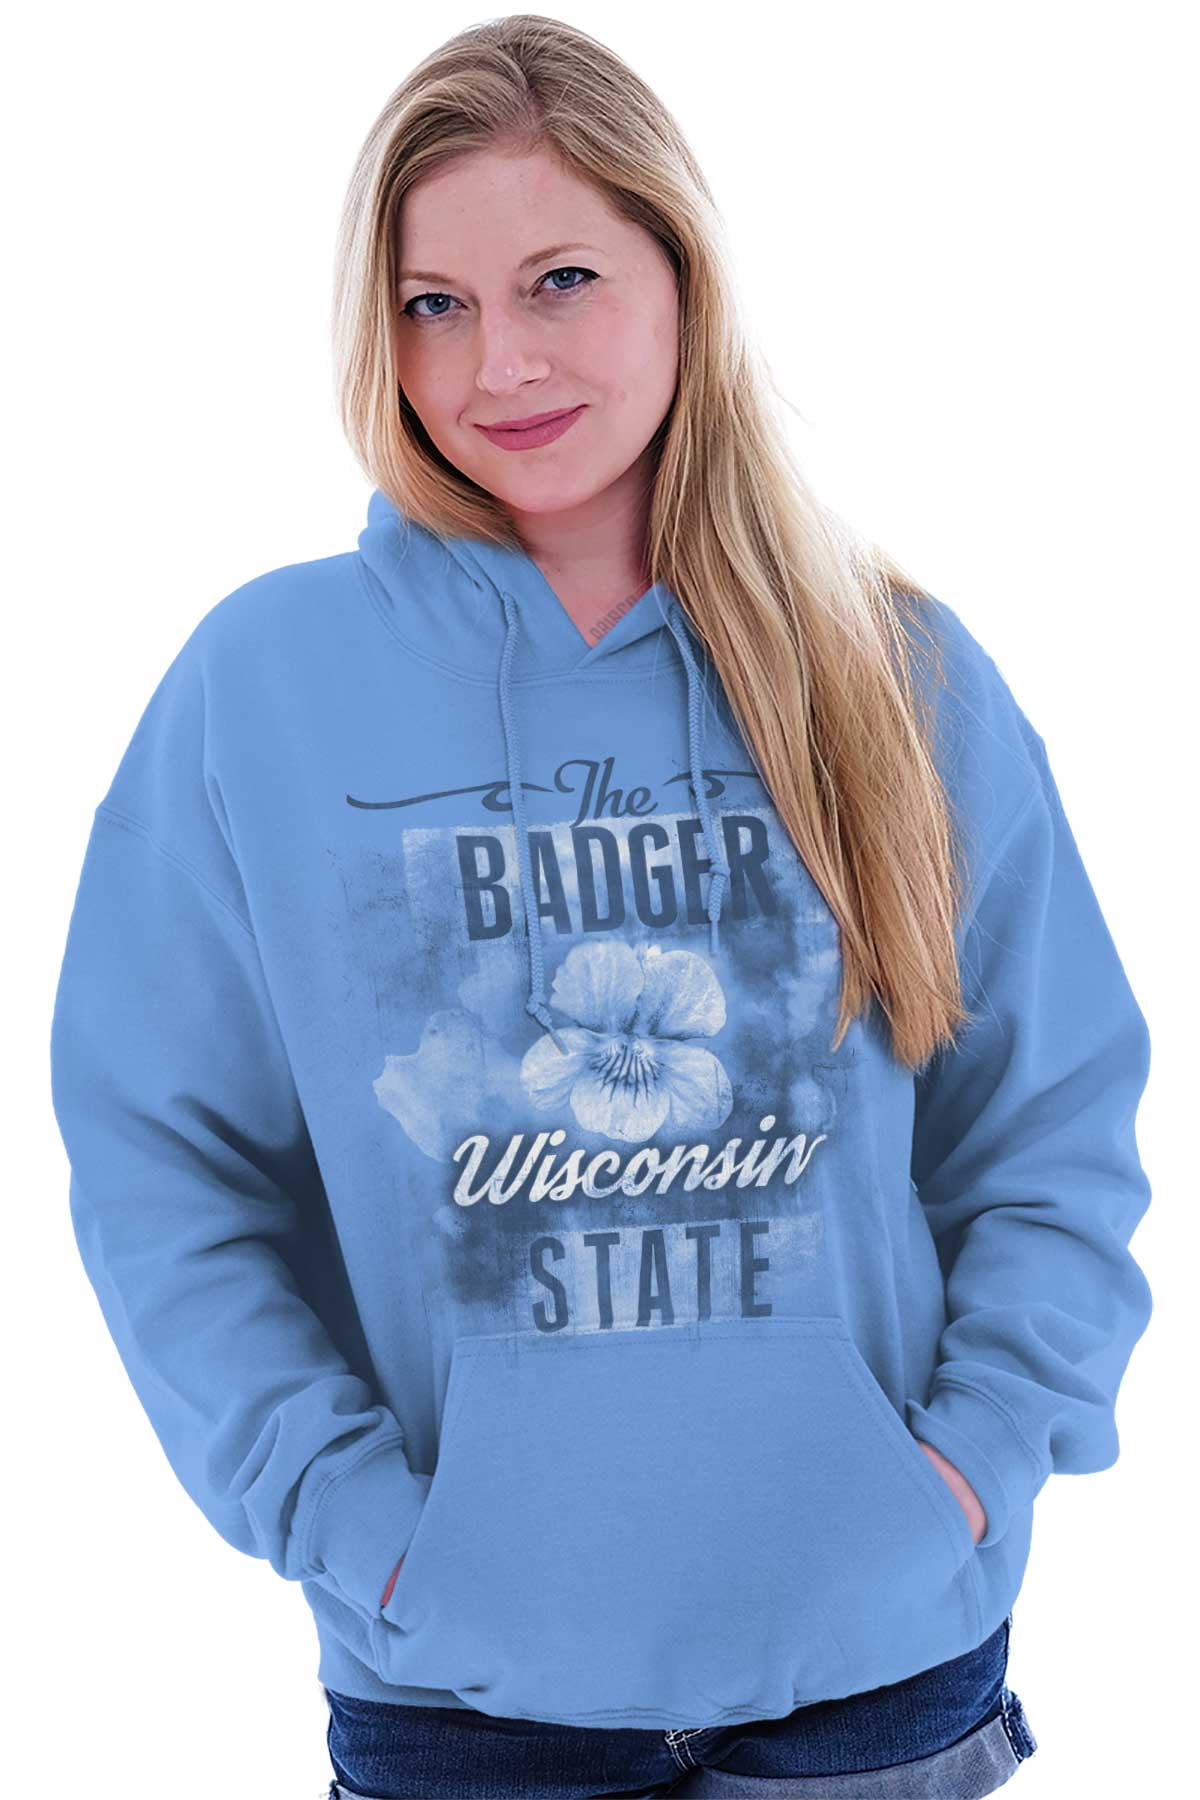 Mom`s Favorite Wisconsin Girl Proud Birthday Gift for a Hometown Girl Unisex Hoodie for Girls and Boys